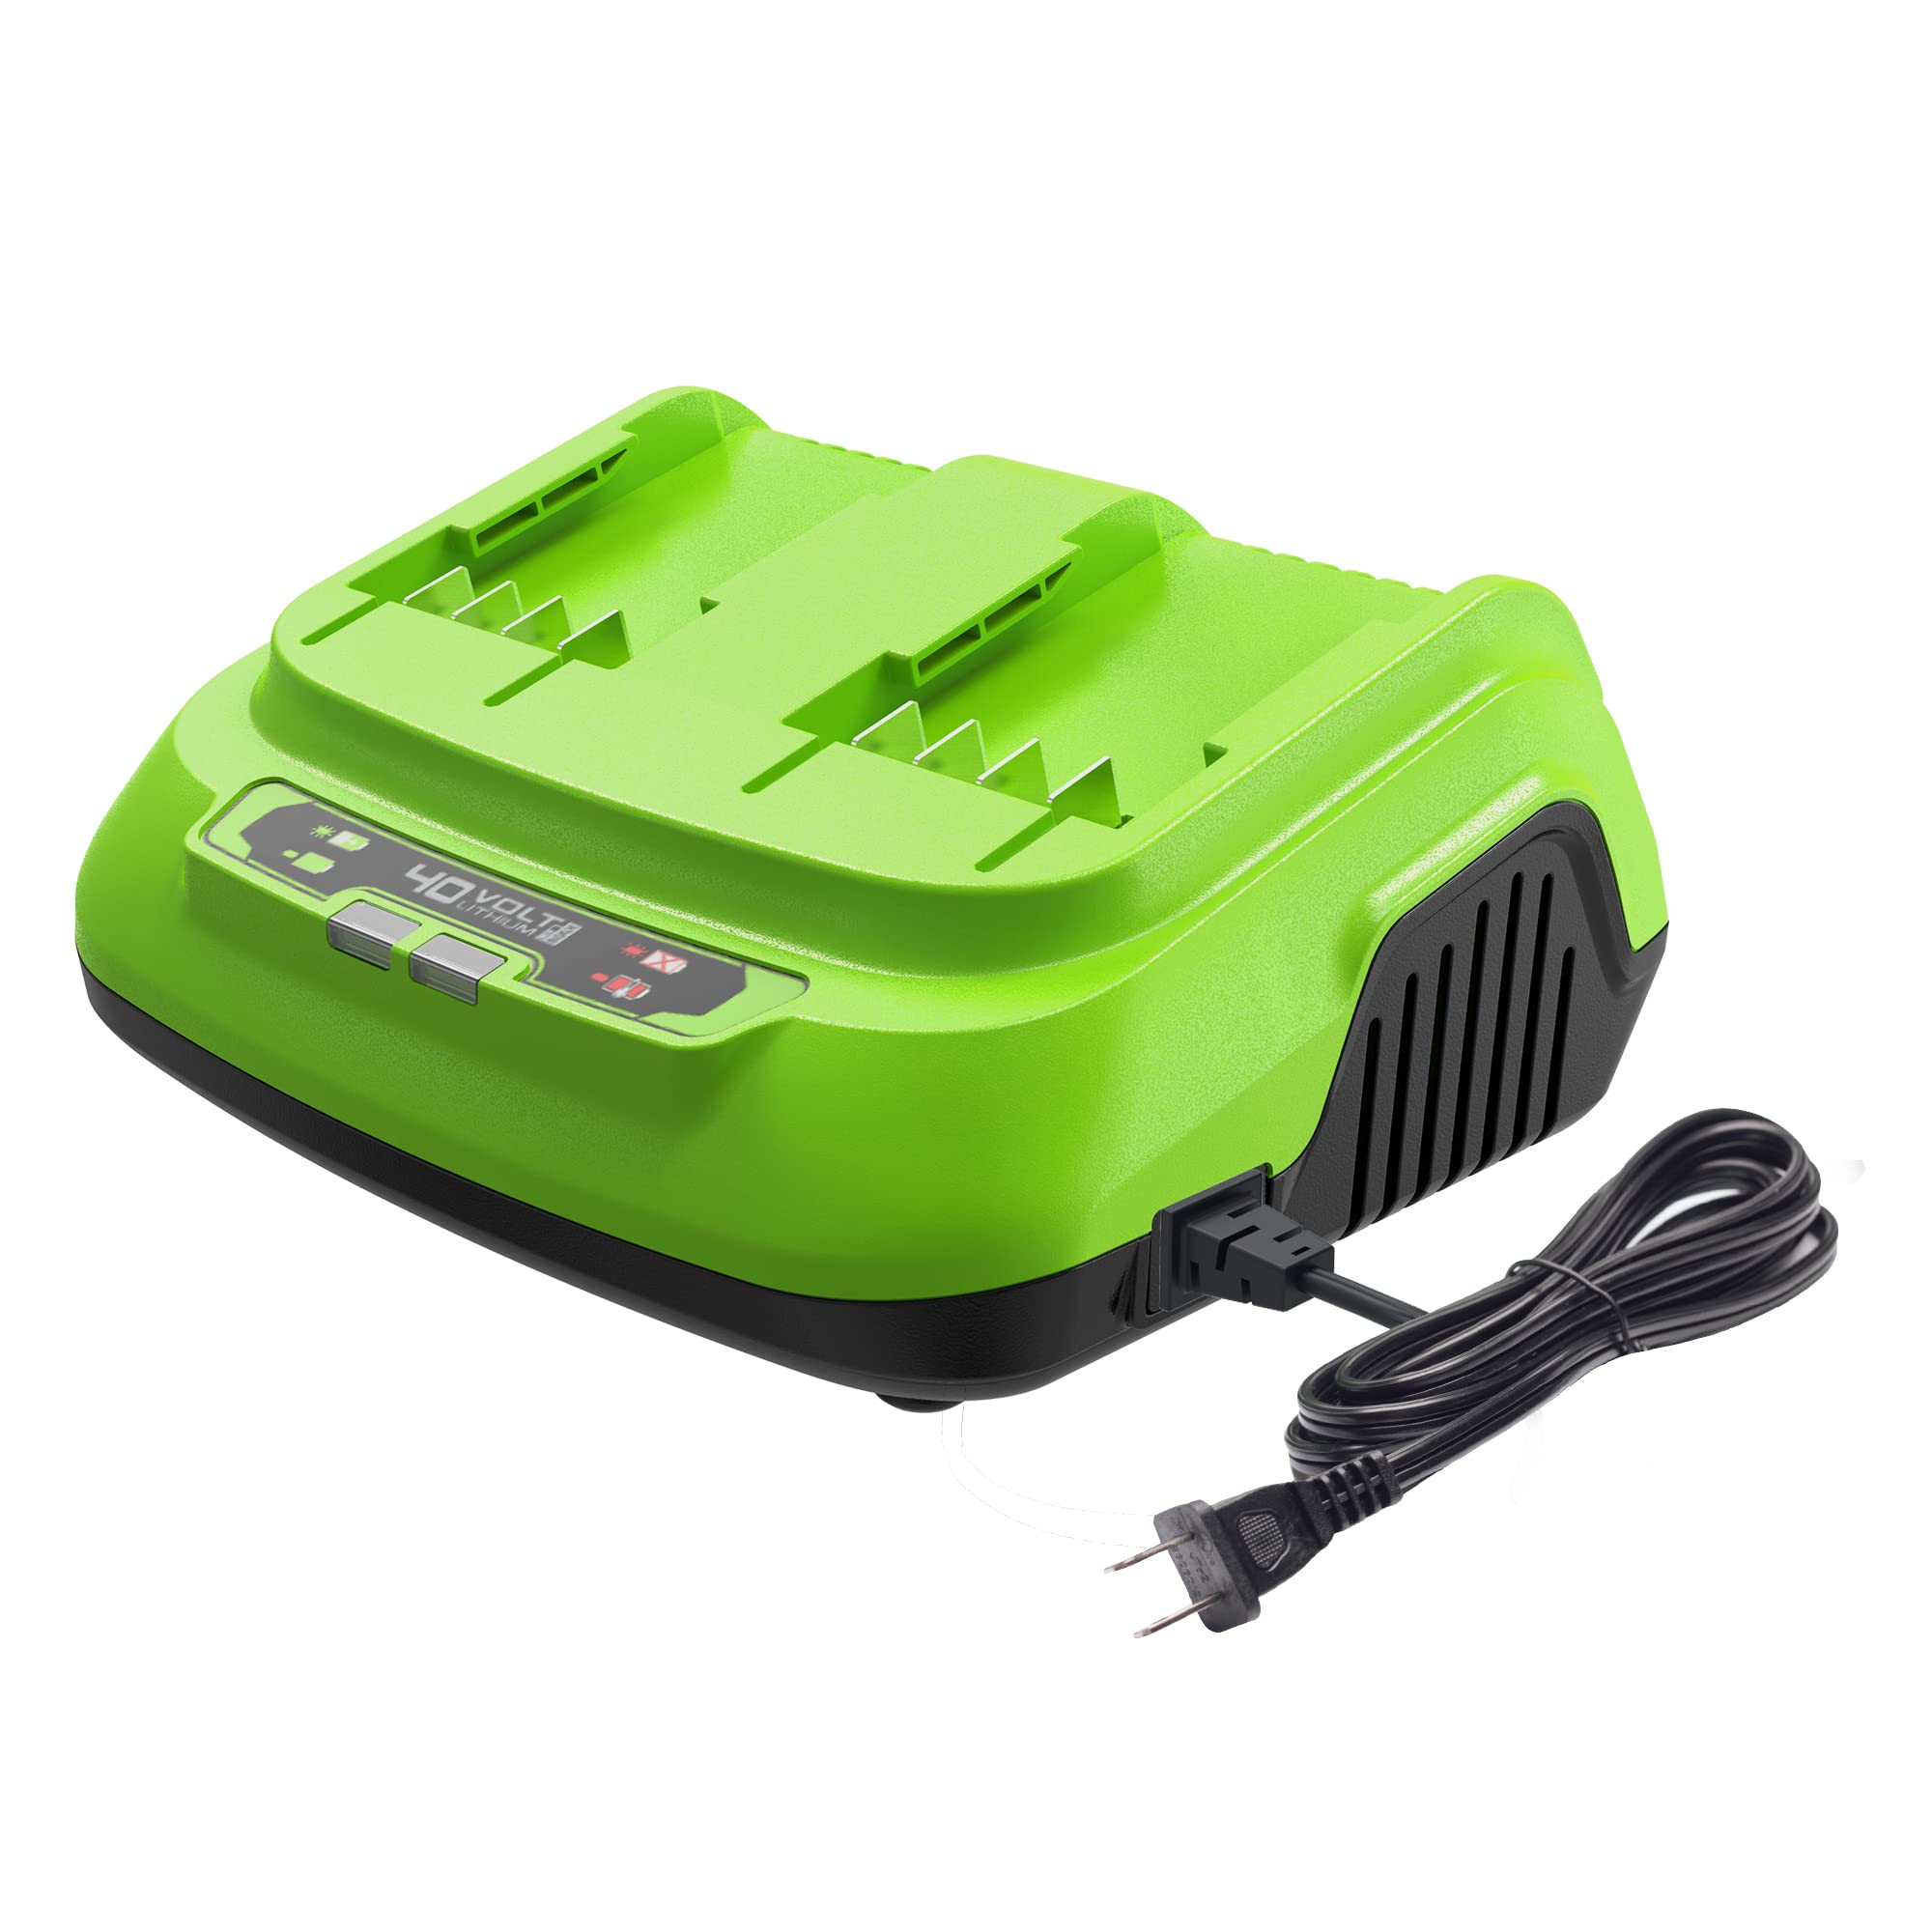 *Price Drop* Greenworks 40V 8A Dual Port Rapid Charger $46.20 + Free Shipping w/ Prime or $35+ orders